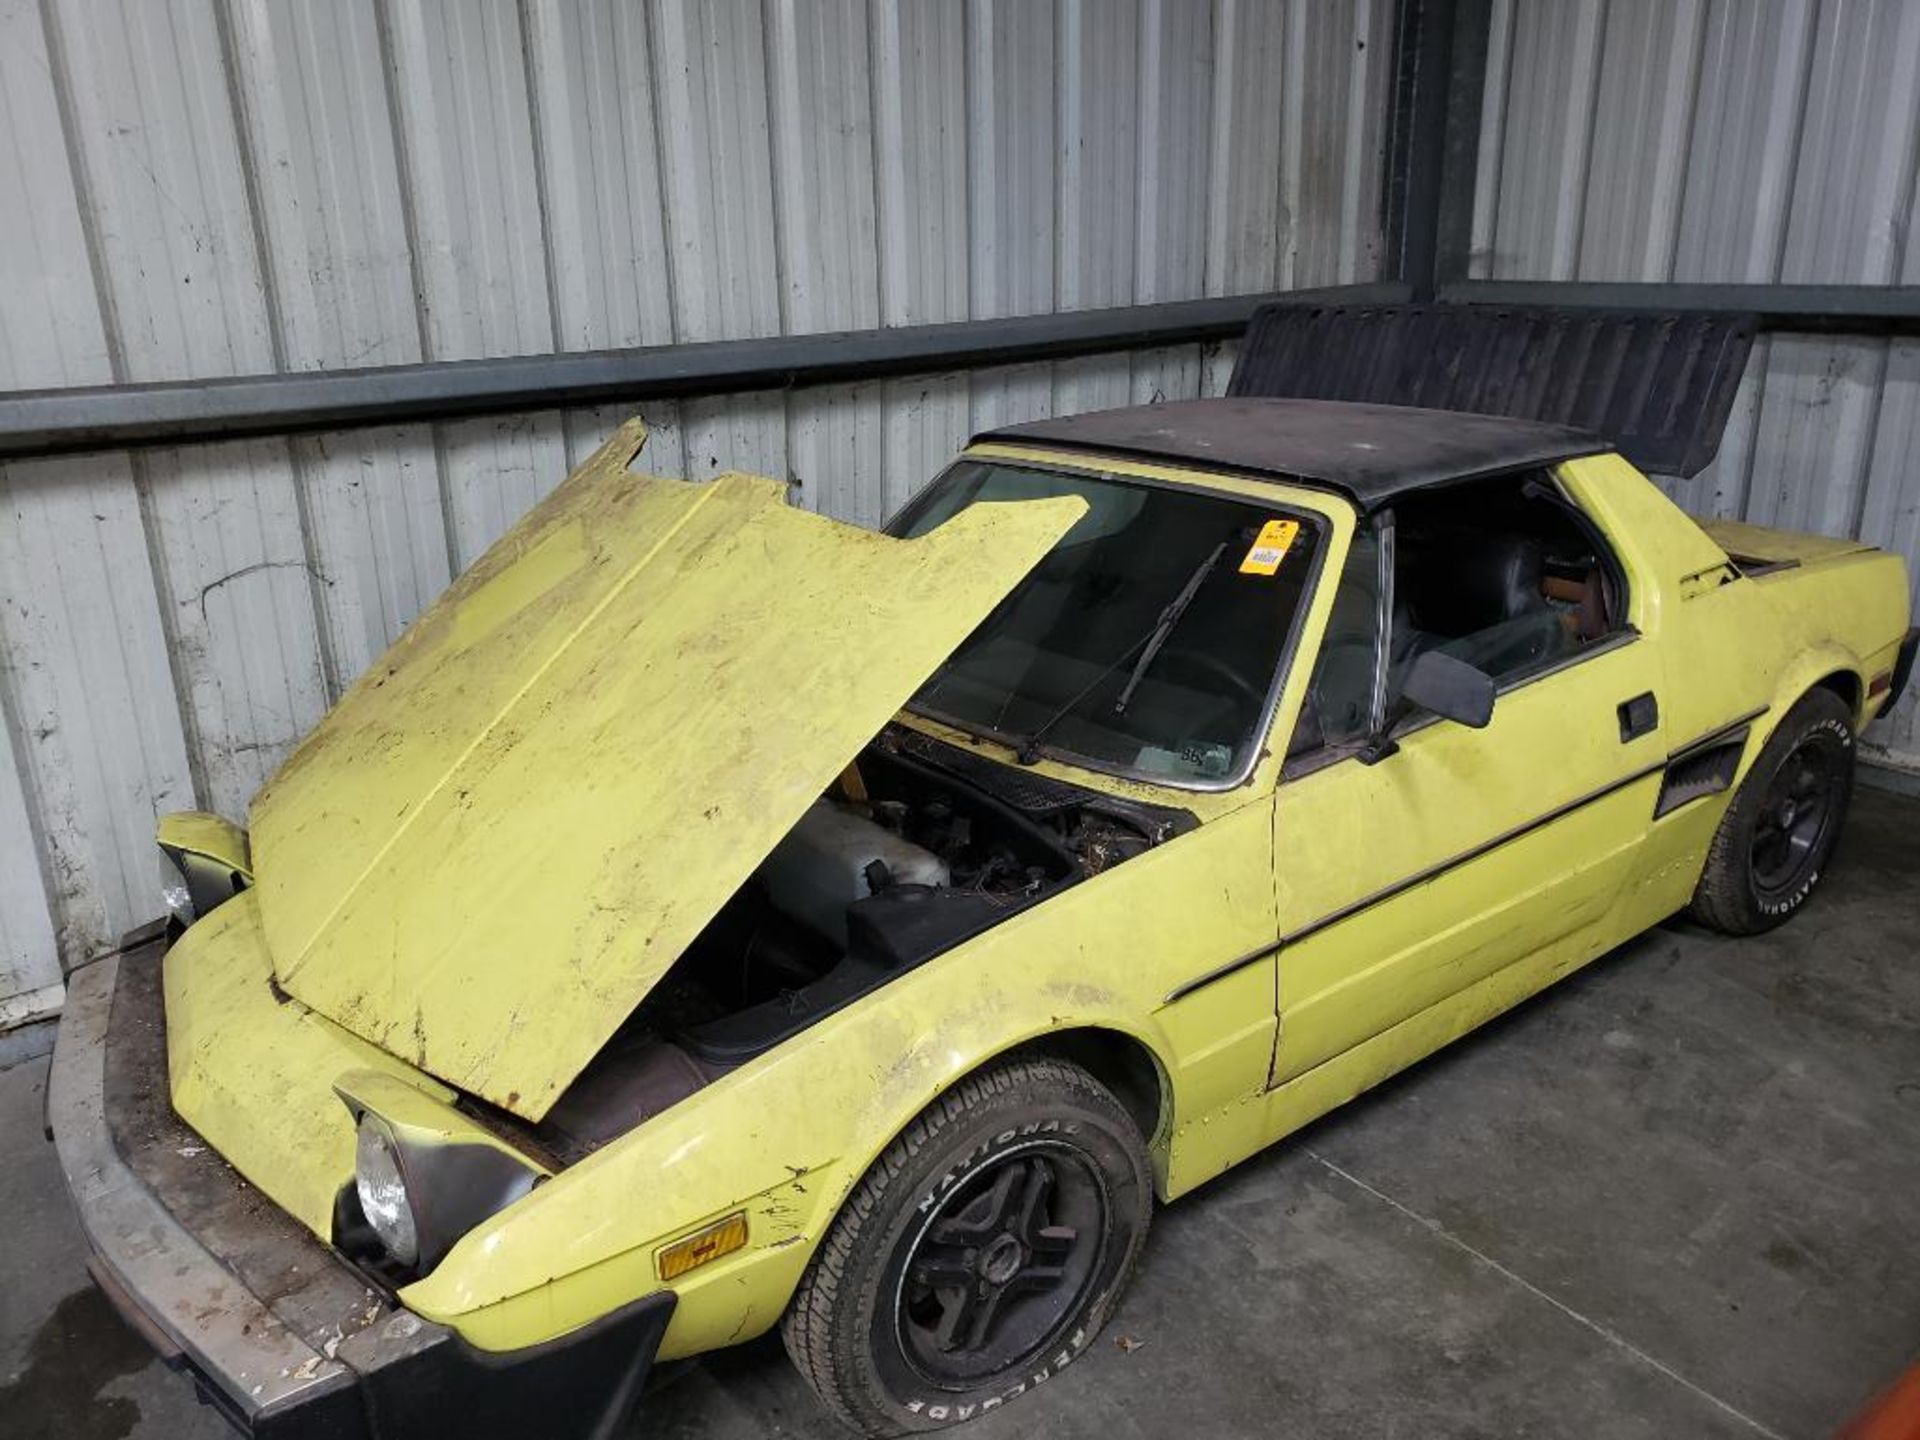 1981 Fiat Bertone. VIN number ZFABS00A6B8142844. Parts repairable. Vehicle IS titled.